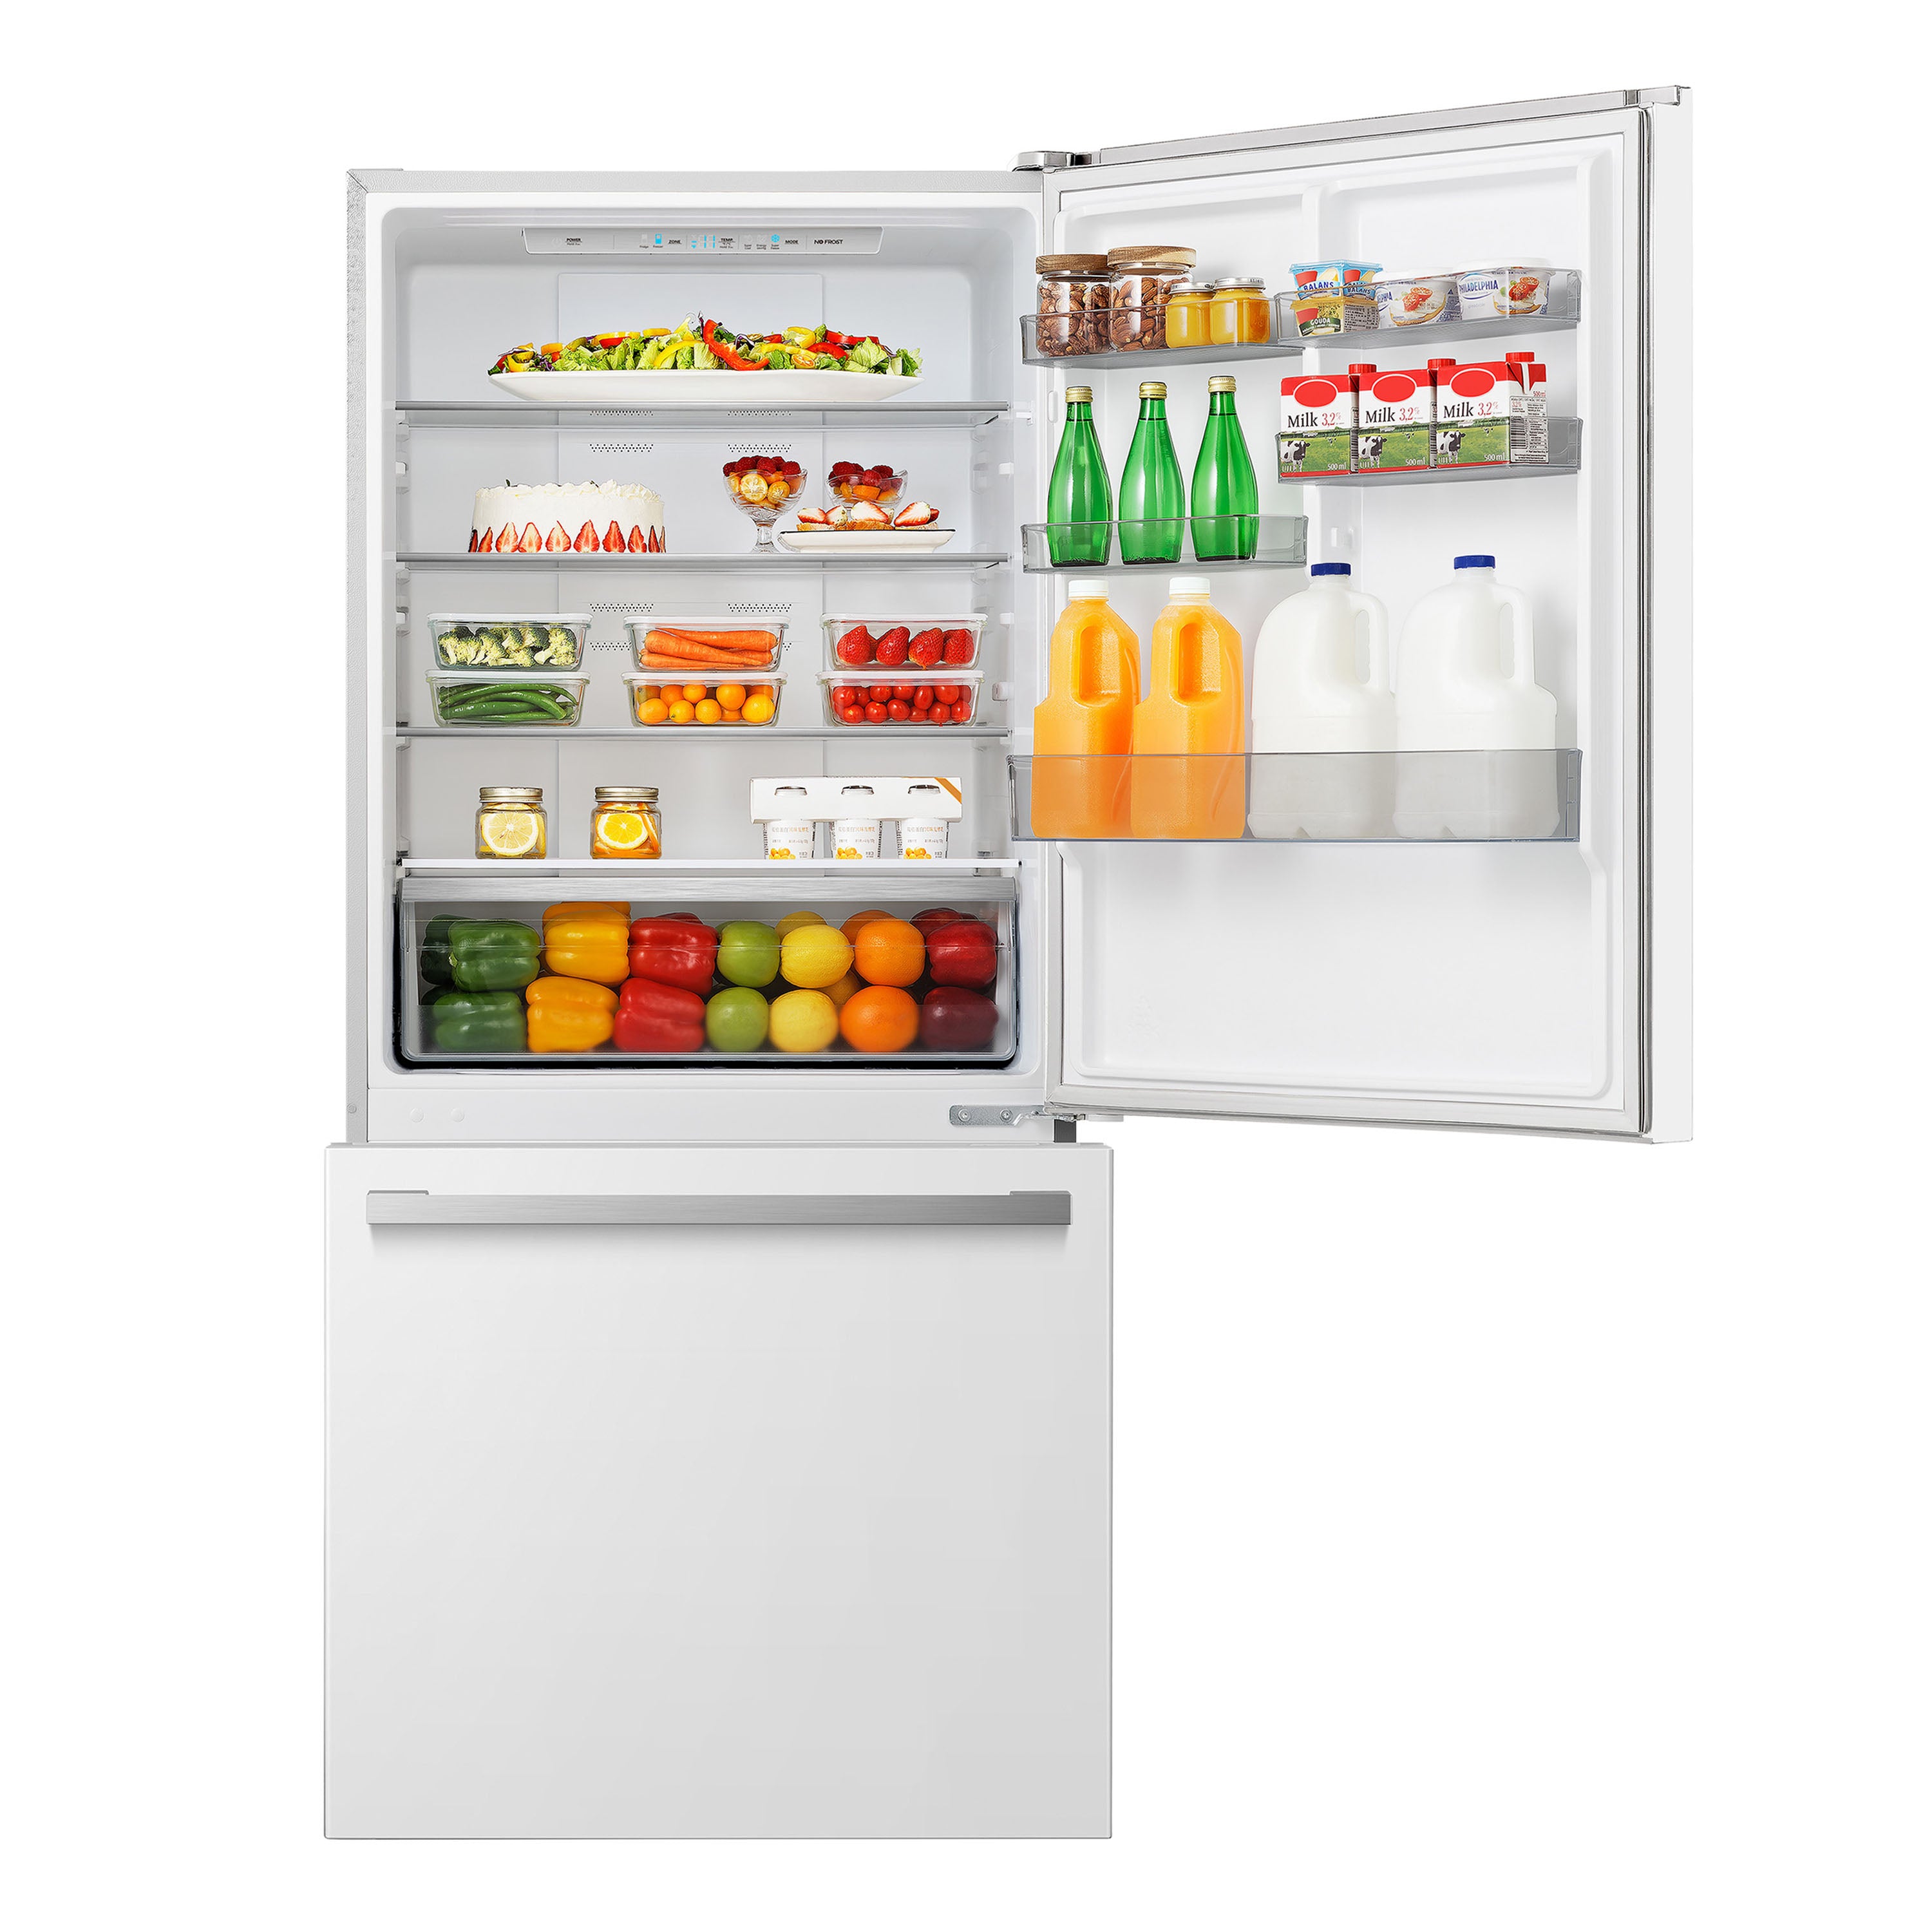 Hisense - 31.1 Inch 17 cu. ft Bottom Mount Refrigerator in White - RB17A2CWE